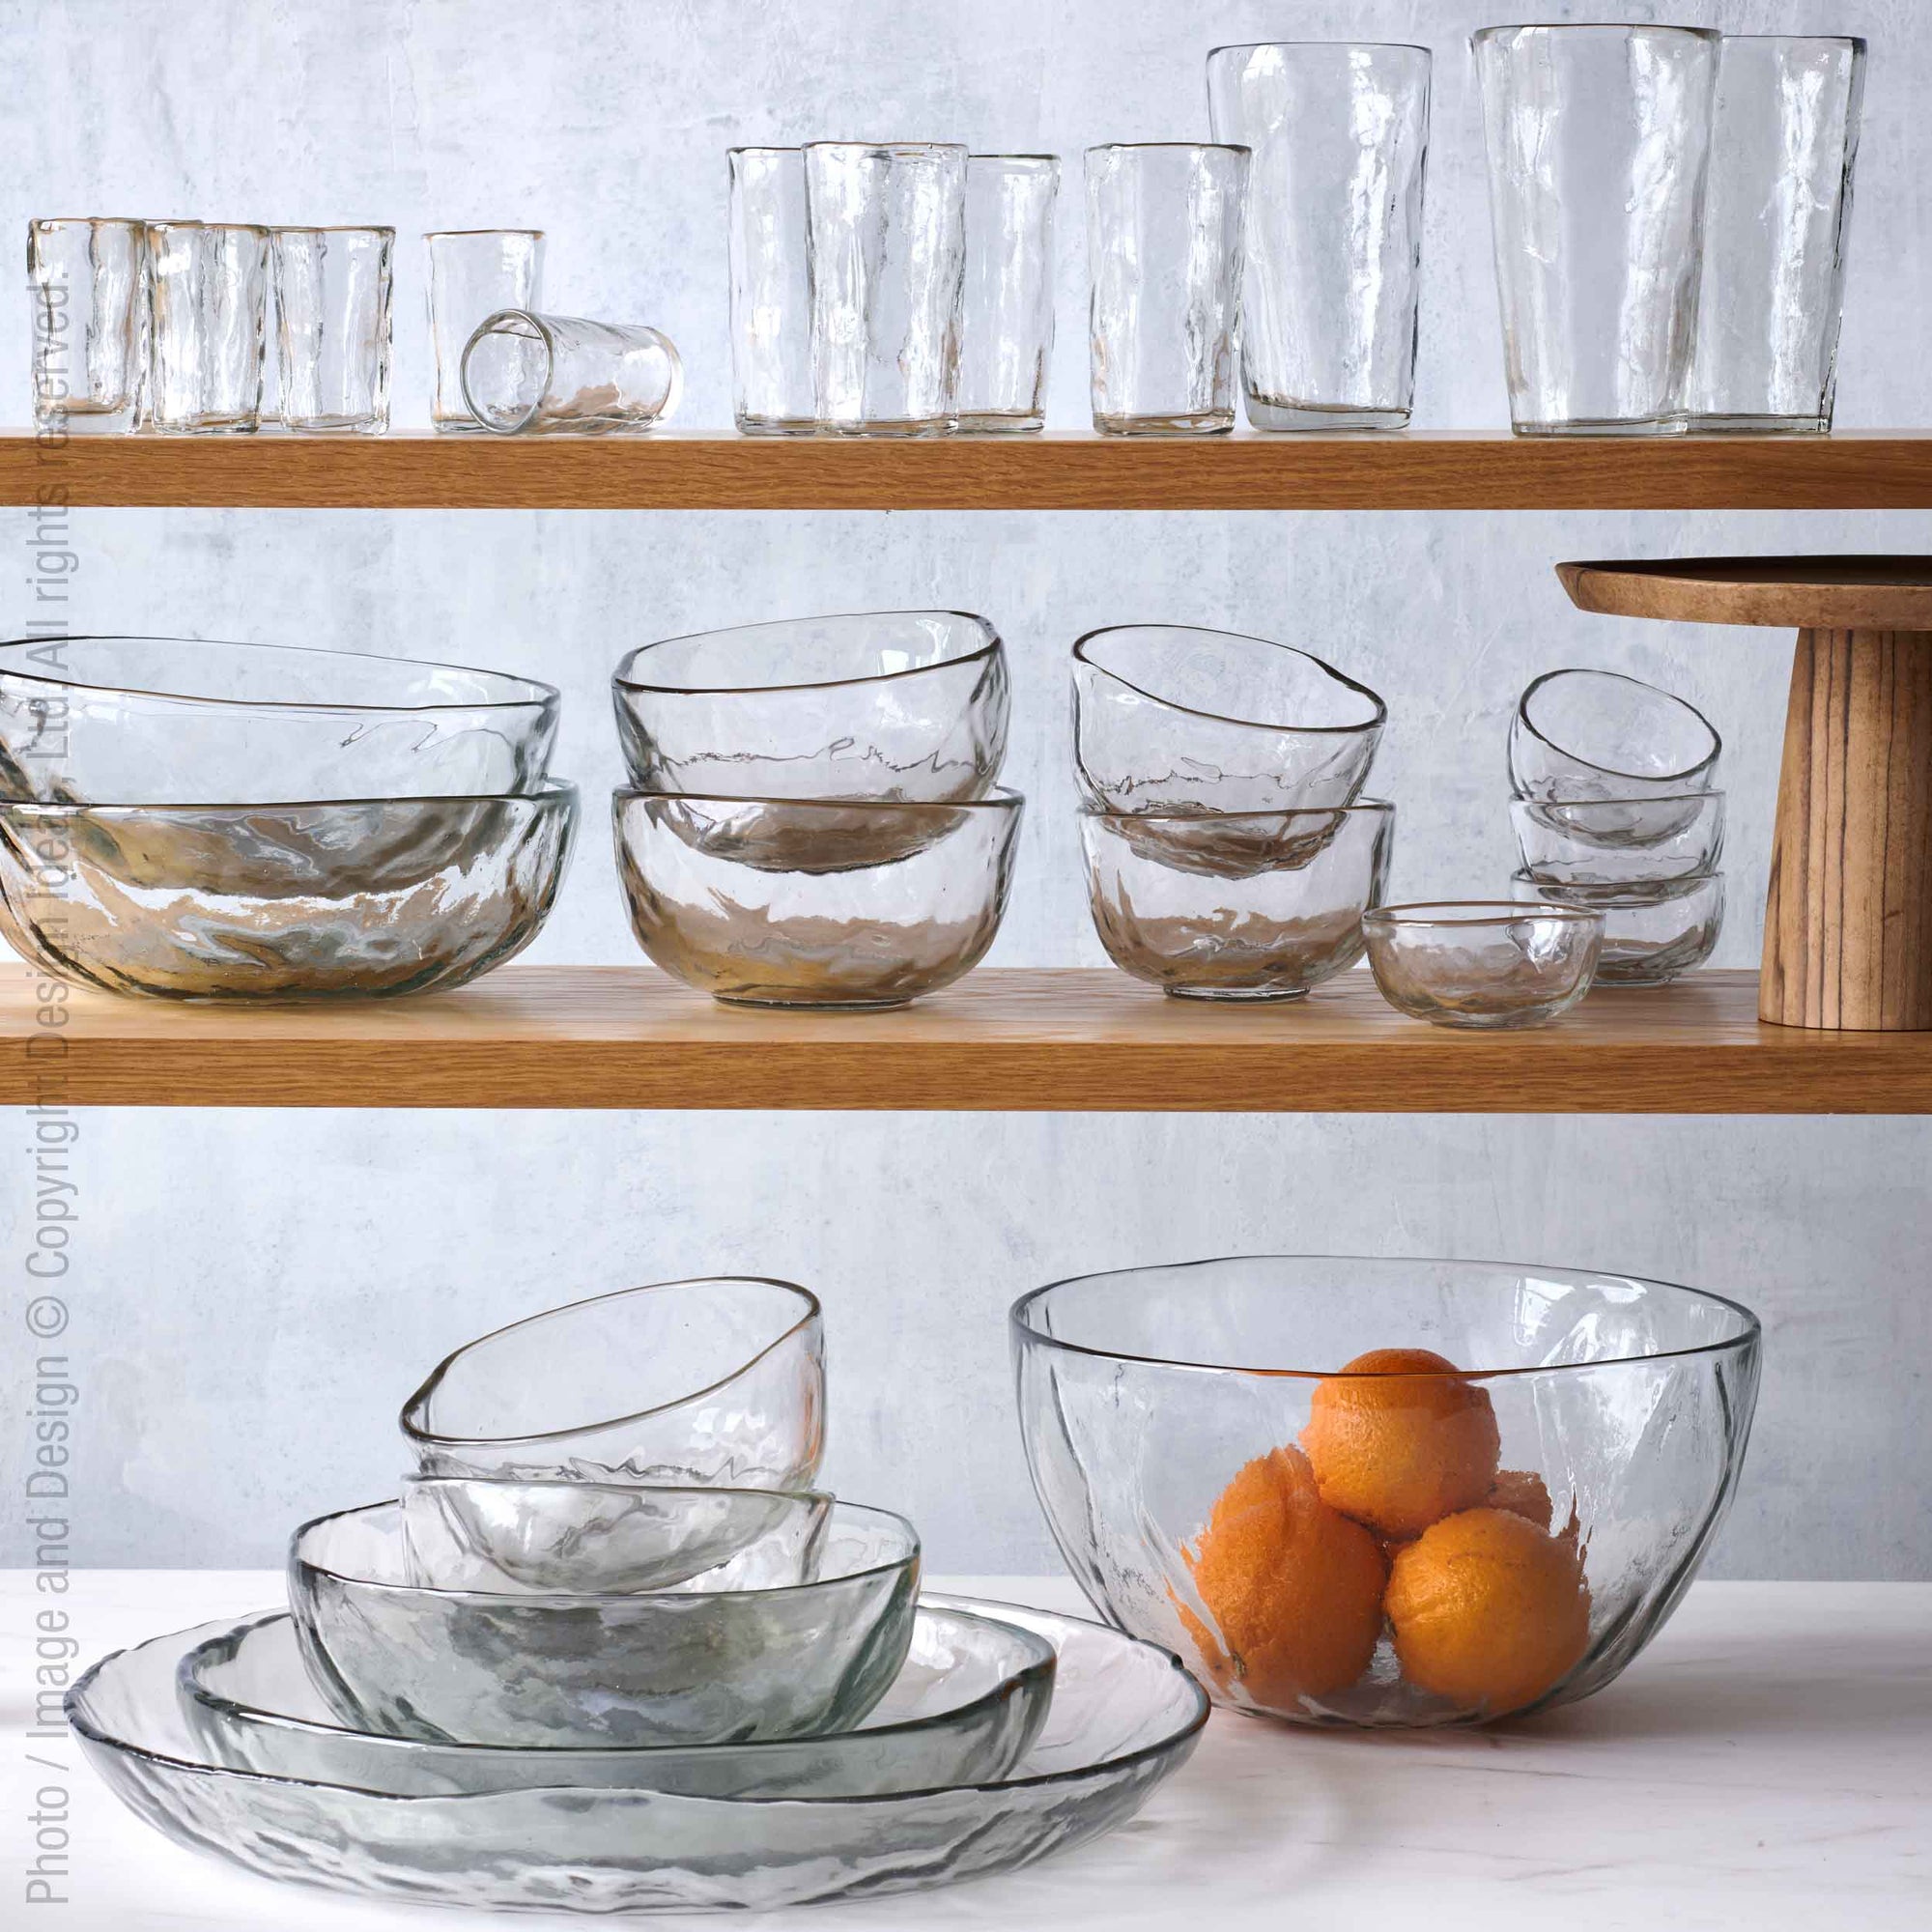 Wabisabi™ decorative bowl (16in) - Clear | Image 7 | Premium Bowl from the Wabisabi collection | made with Glass for long lasting use | texxture